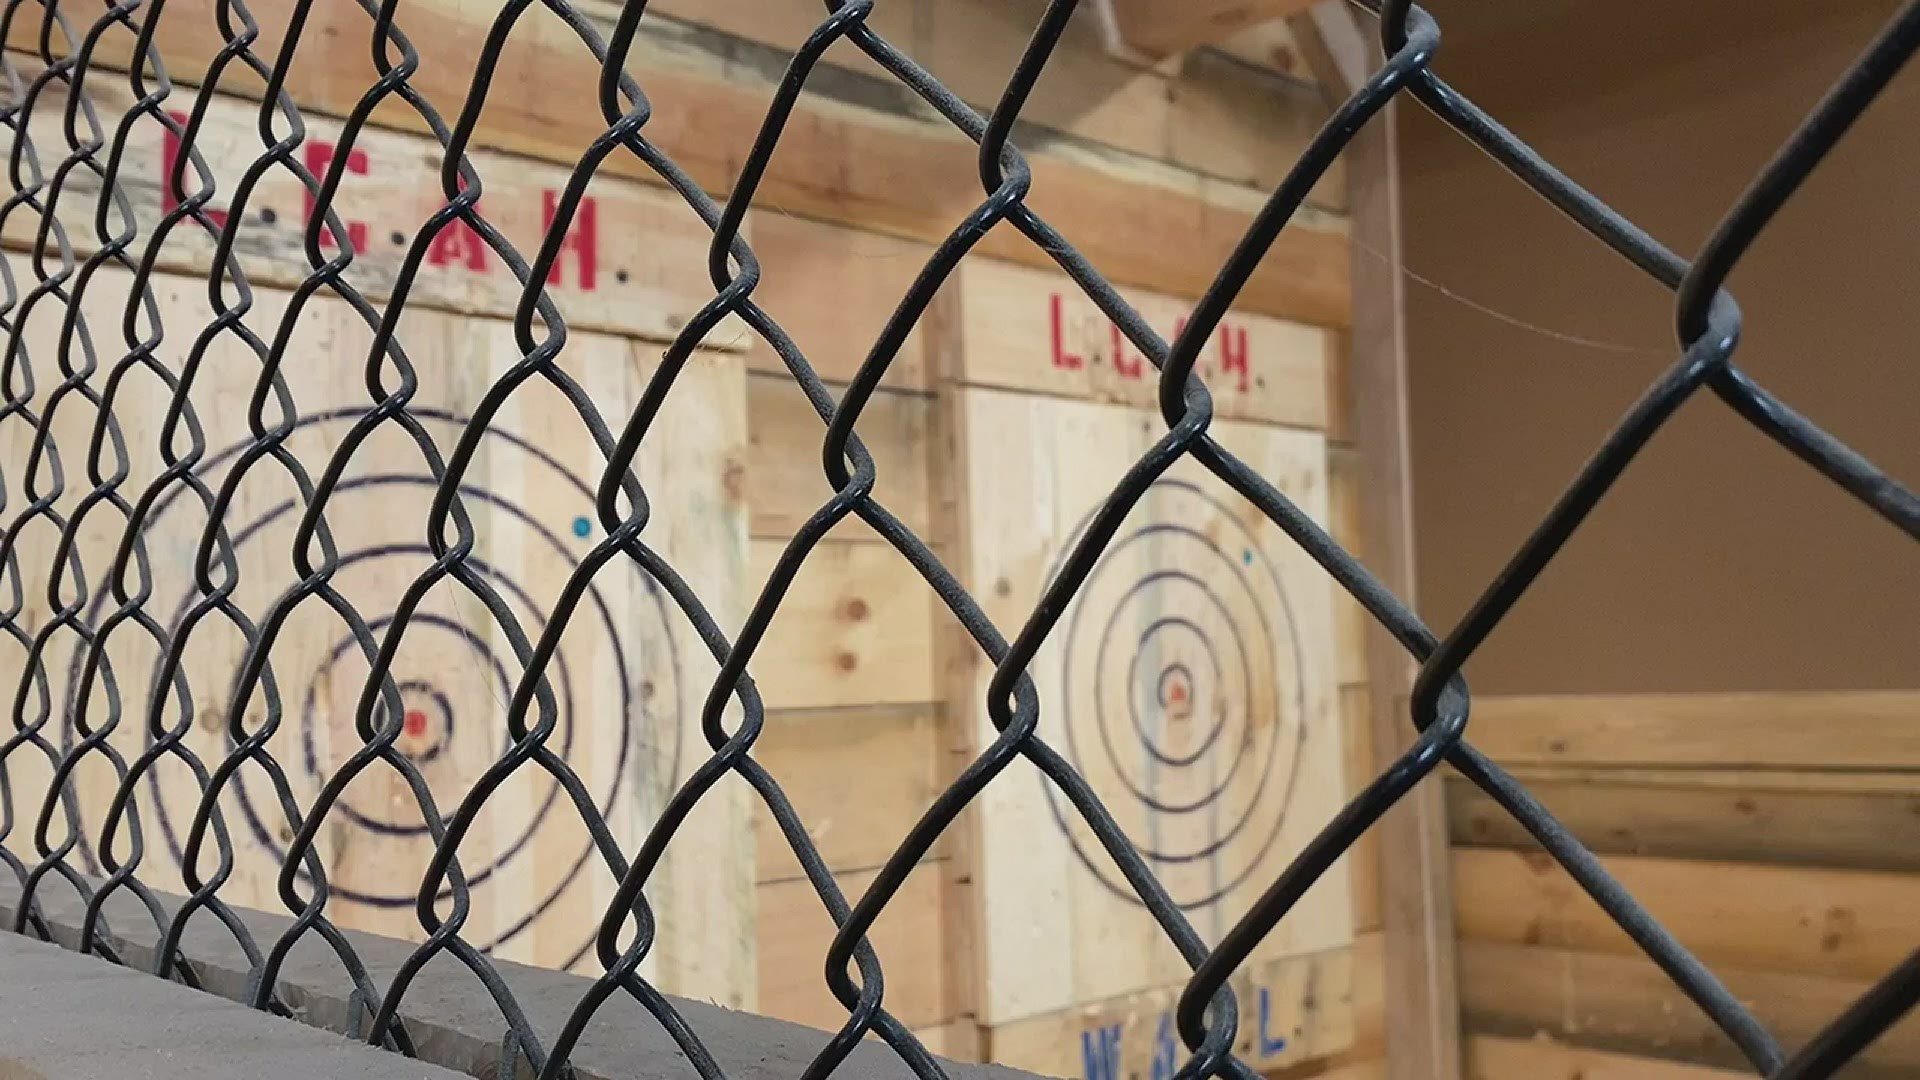 If you have axe throwing talent, they will even teach you varying throwing techniques.